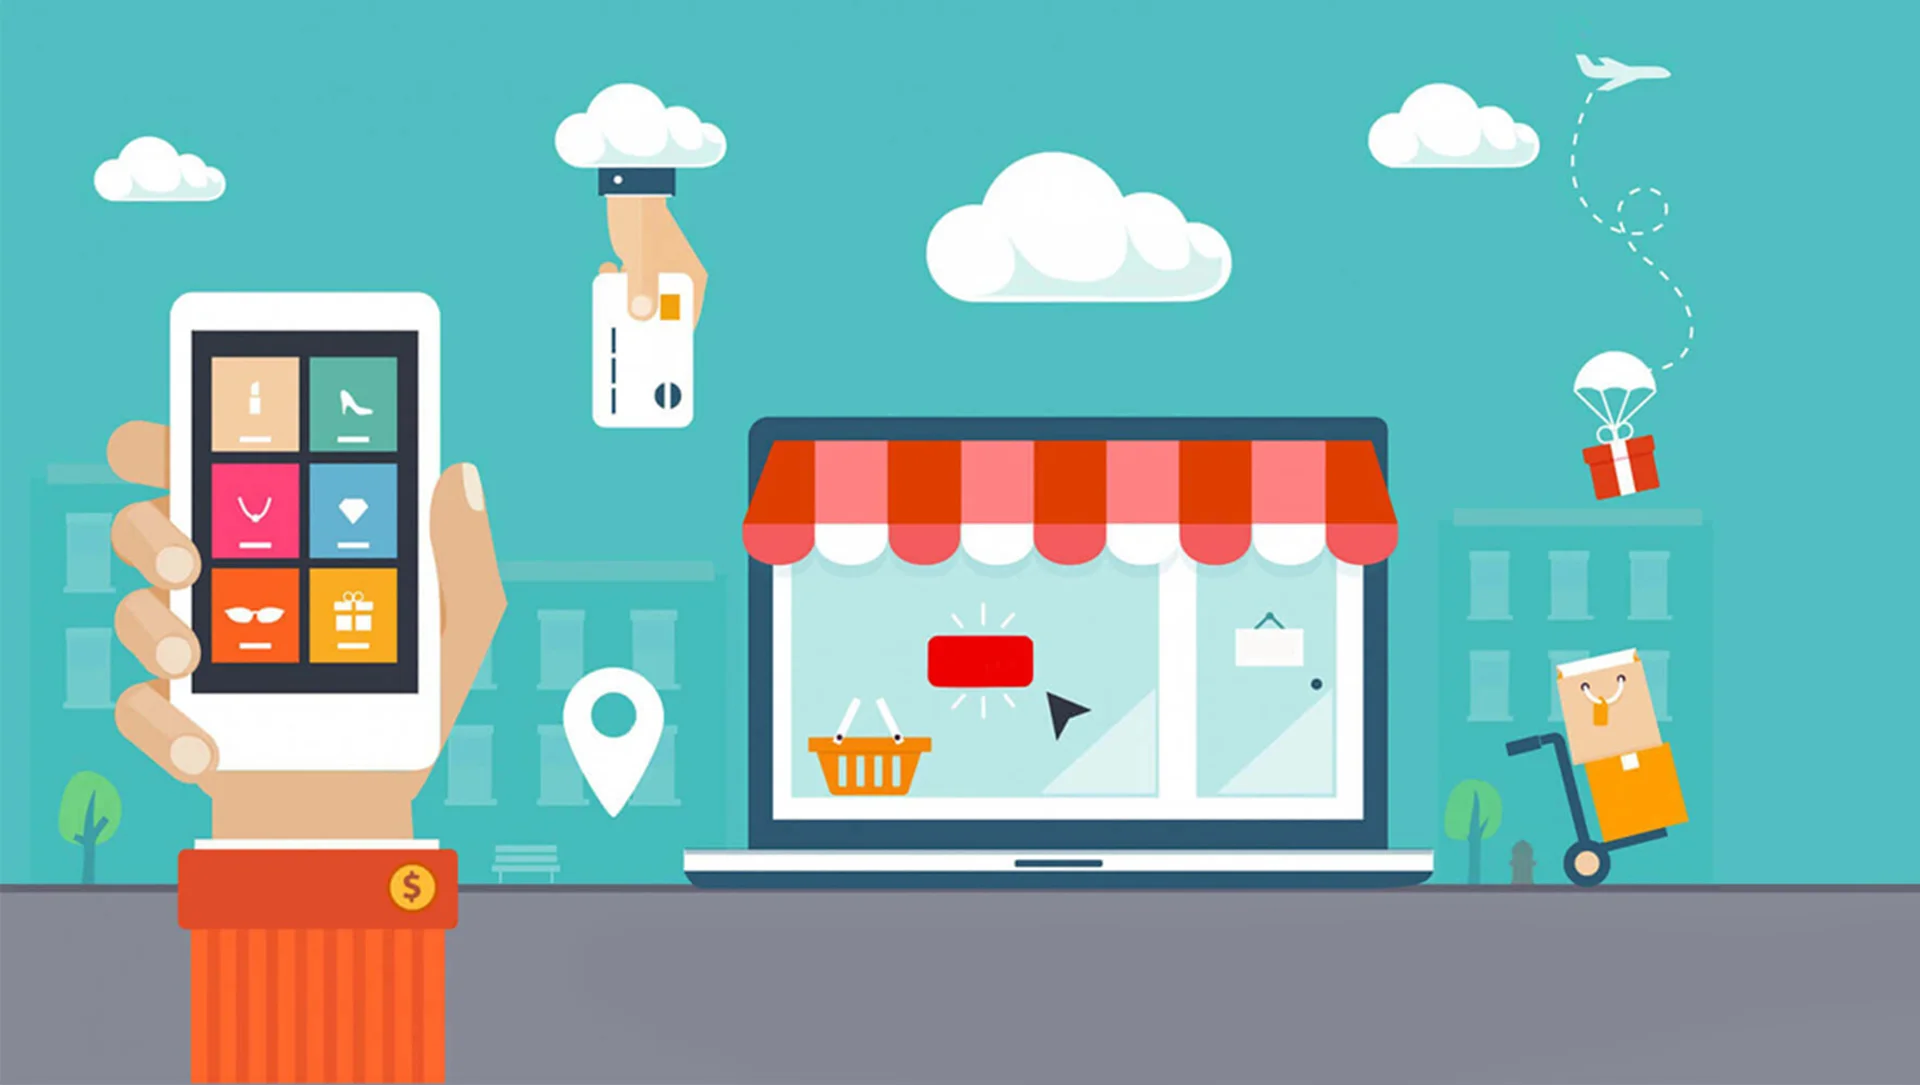 e-commerce-mobile-app-development-2022-know-the-features-trends-cost-related-blog-16